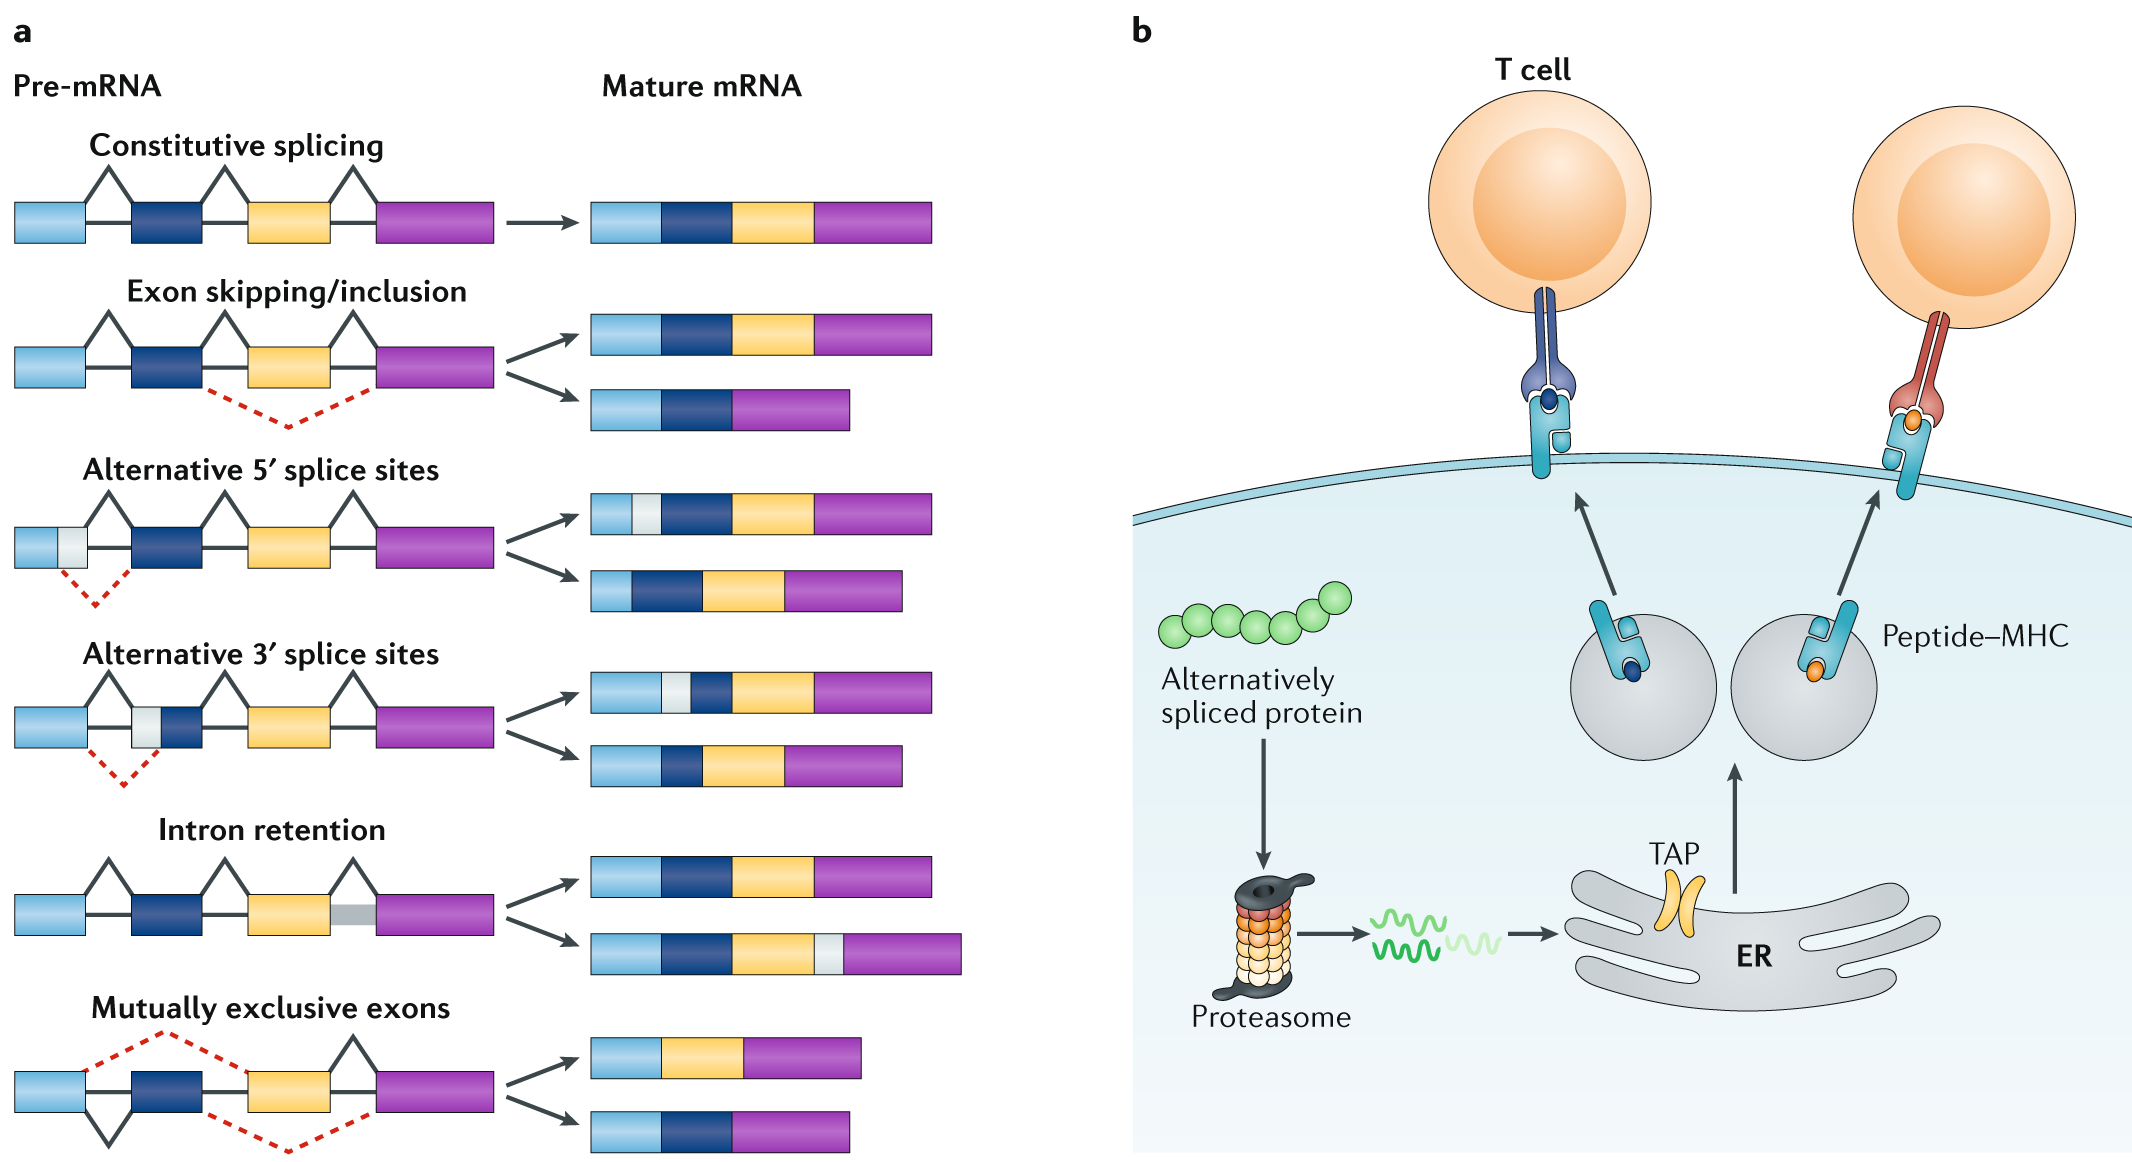 The role played by alternative splicing in antigenic variability